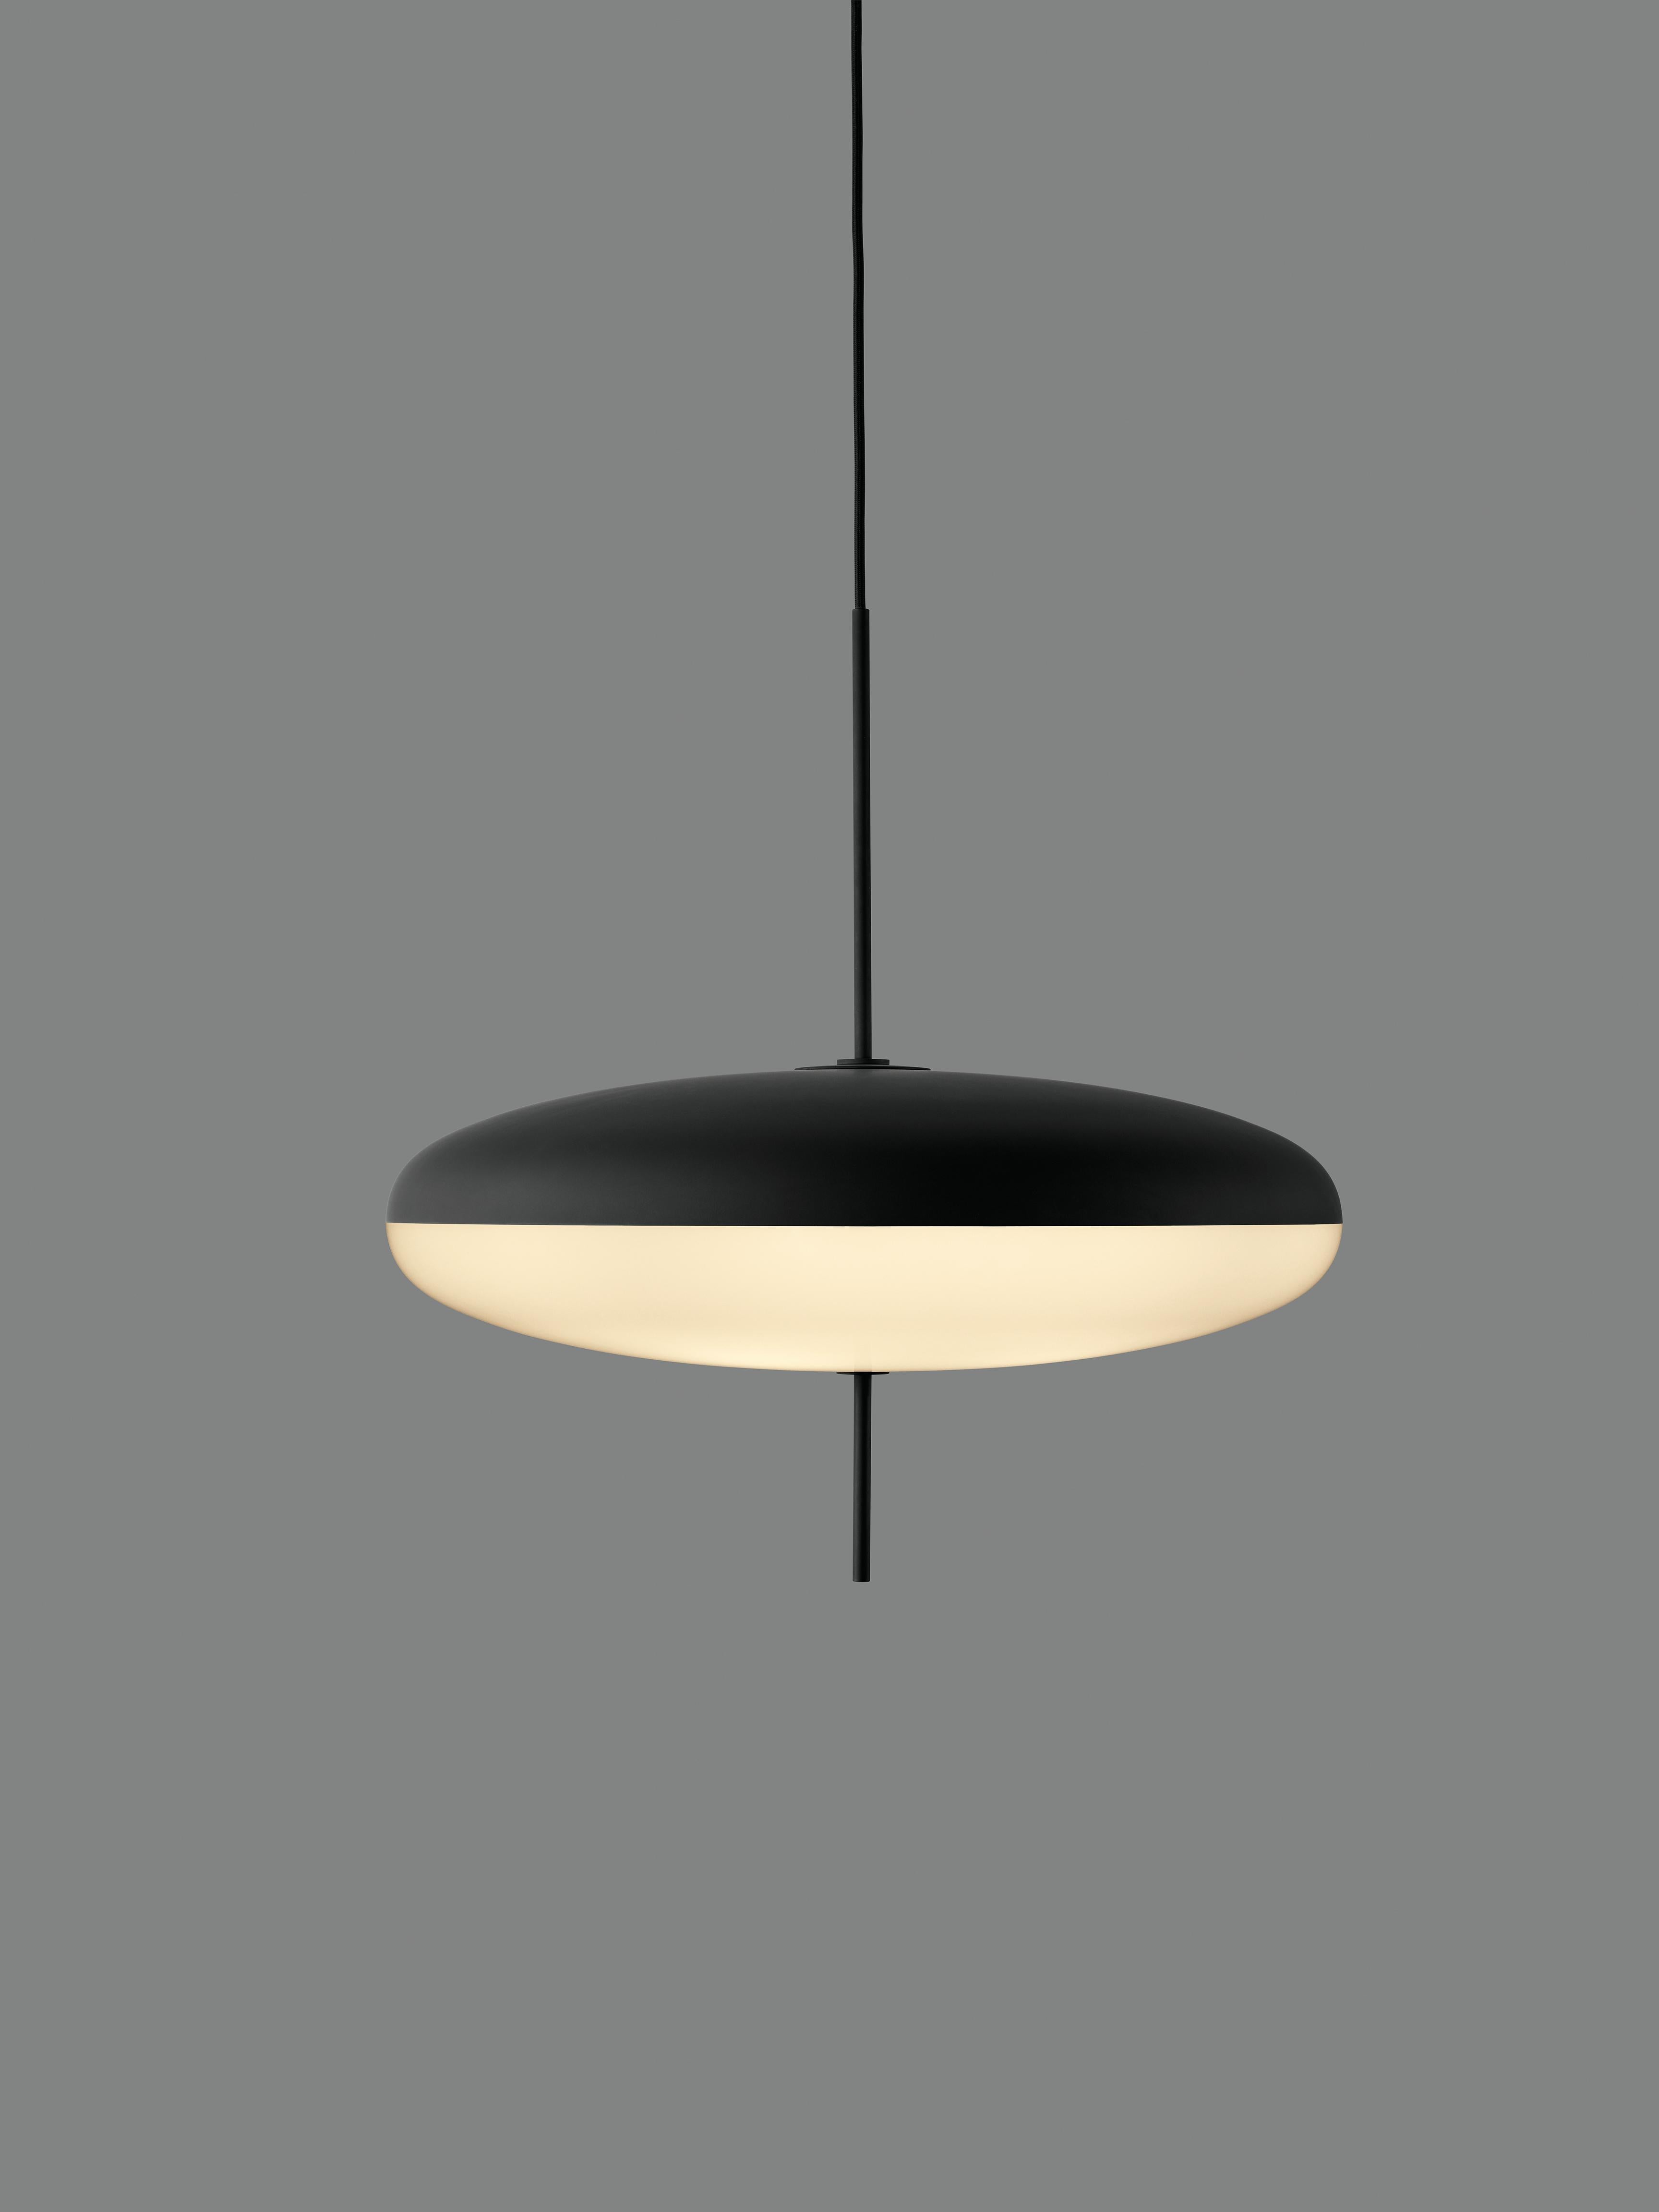 Gino Sarfatti model no. 2065 ceiling lamp in black and white. Designed in 1950, this is an authorized 2017 Astep/Flos re-edition by Alessandro Sarfatti, grandson of Gino Sarfatti, who applies his grandfather's scrupulous attention to detail and